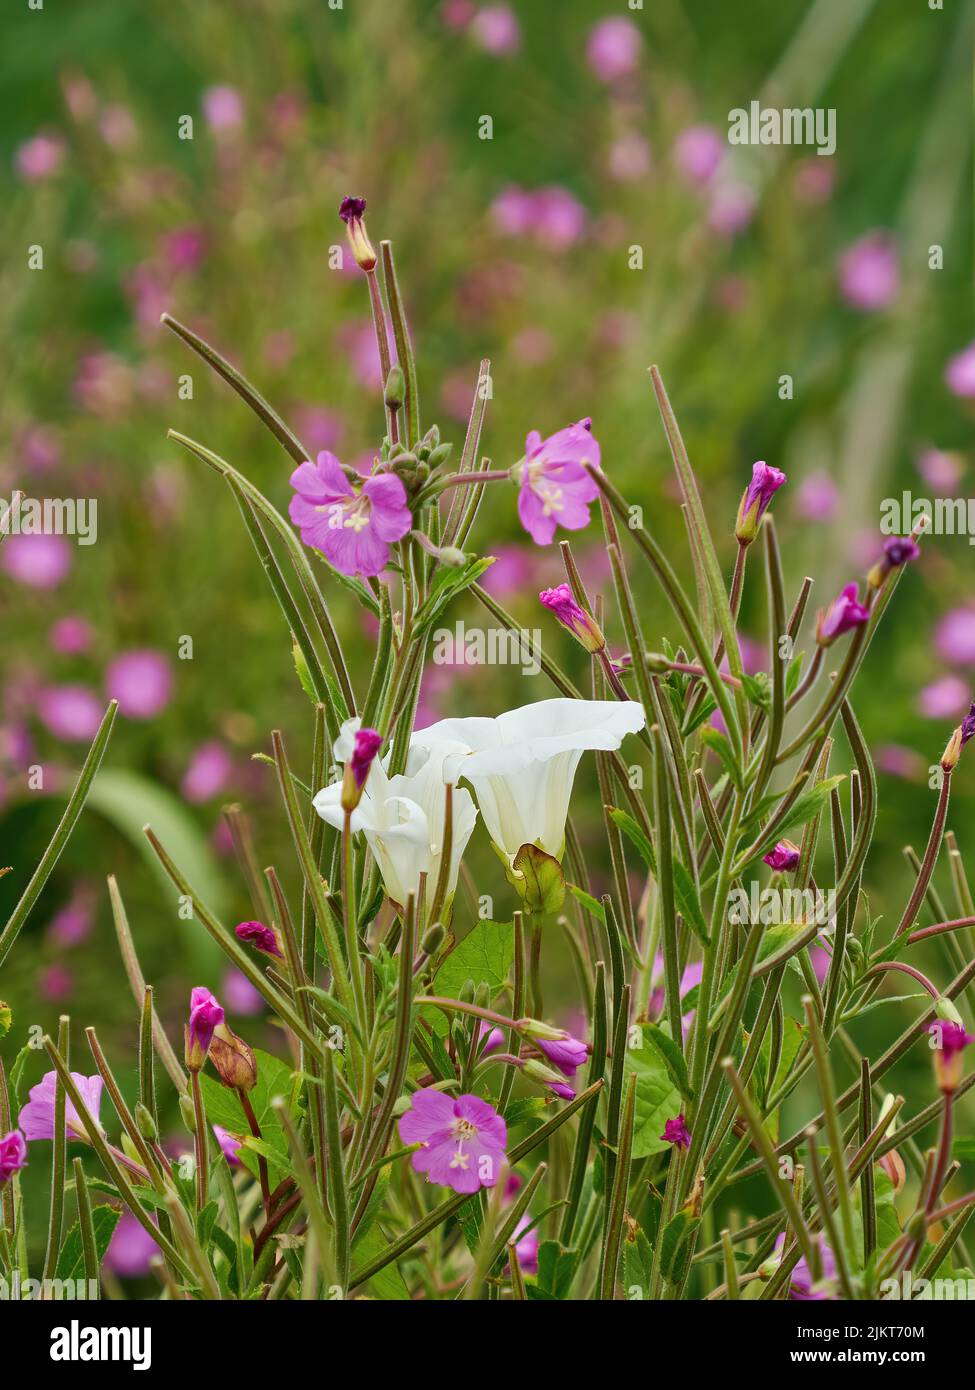 Plant portrait showing wildflowers in the UK Countryside, with intertwined hedge bindweed and hairy willow herb plants in bloom. Stock Photo